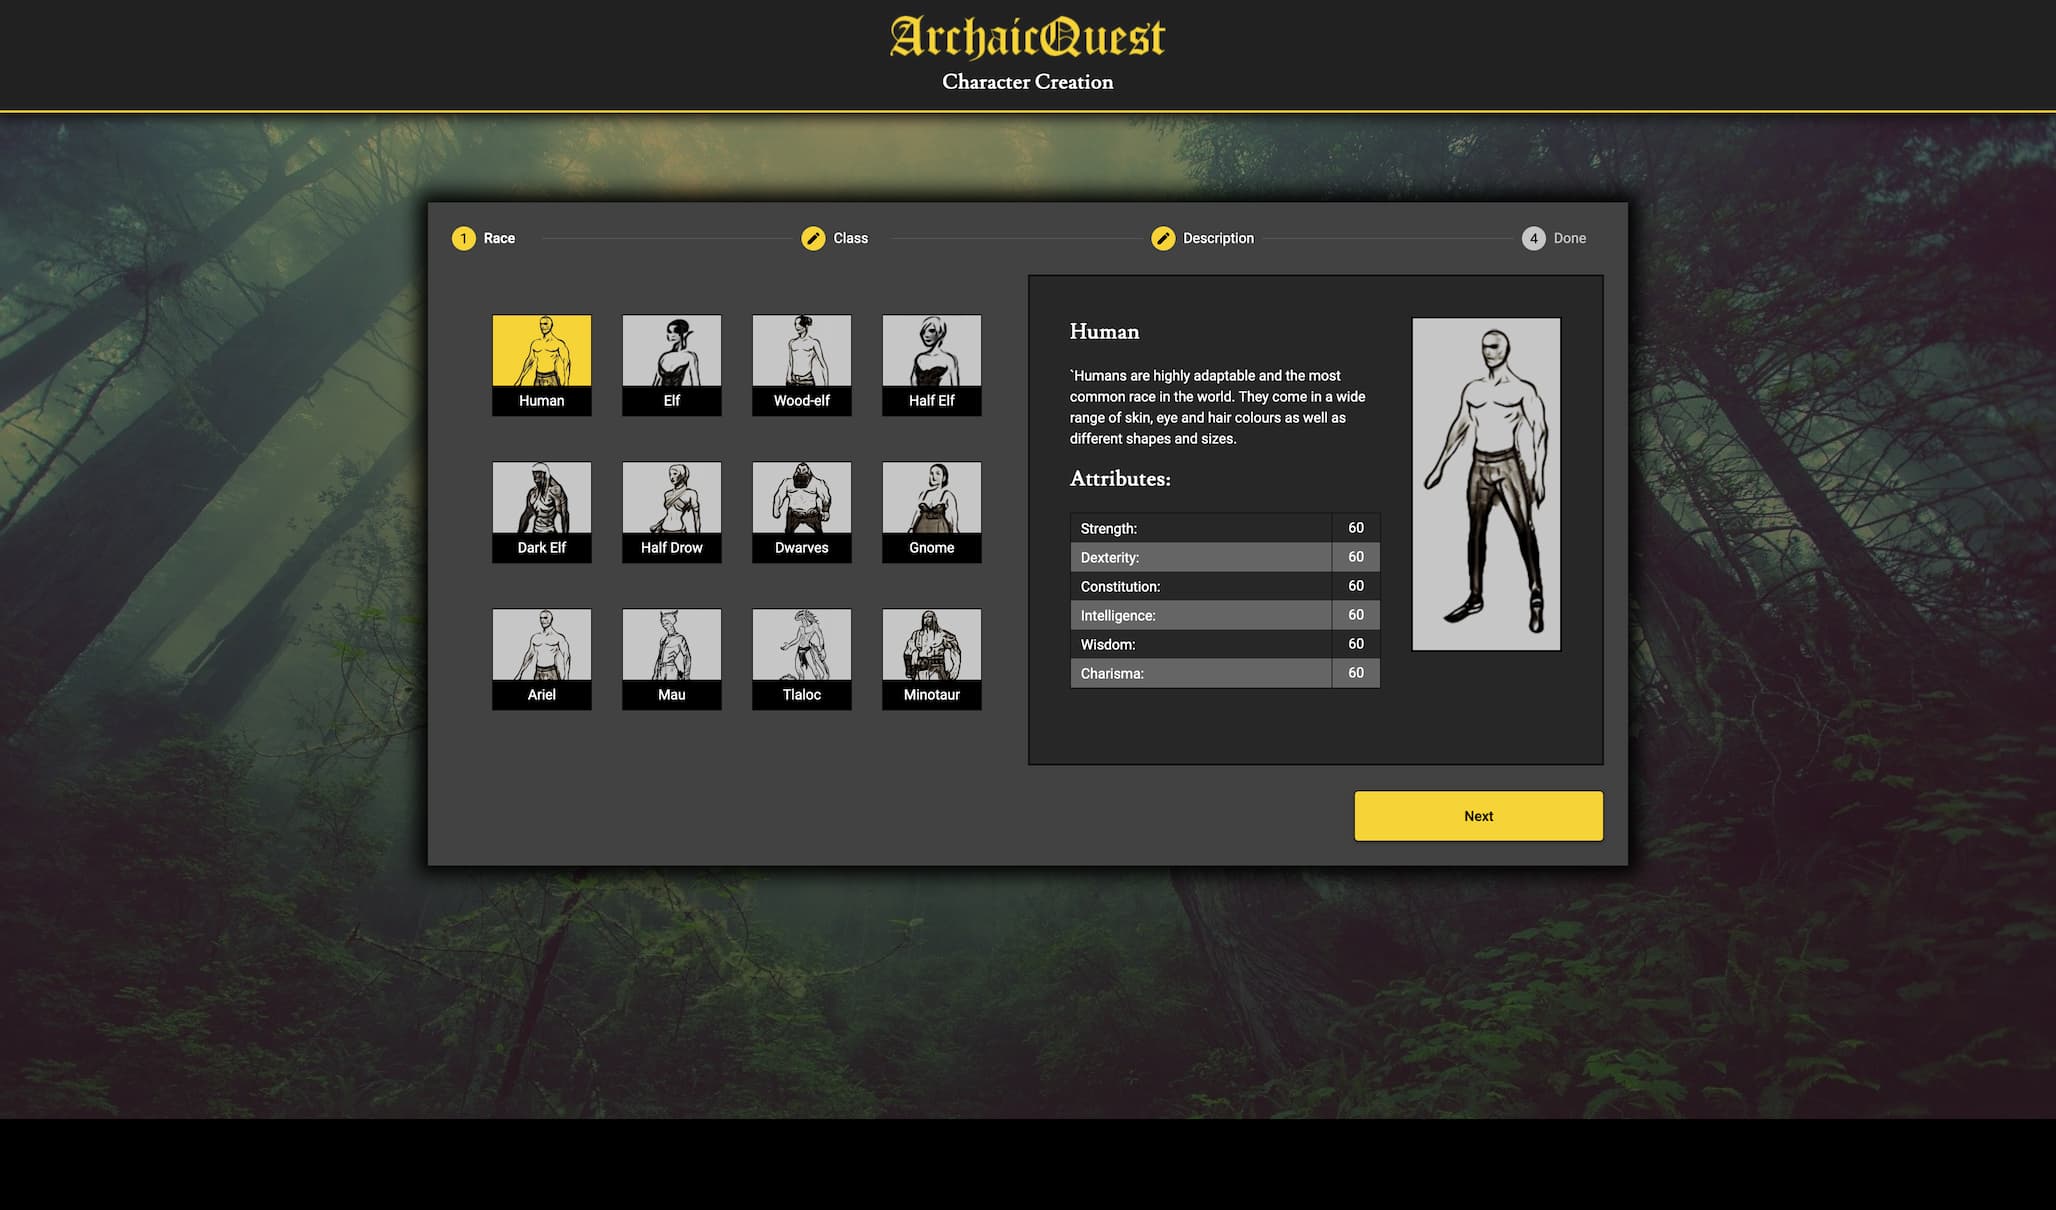 ArchaicQuest creation screen for text based RPG game